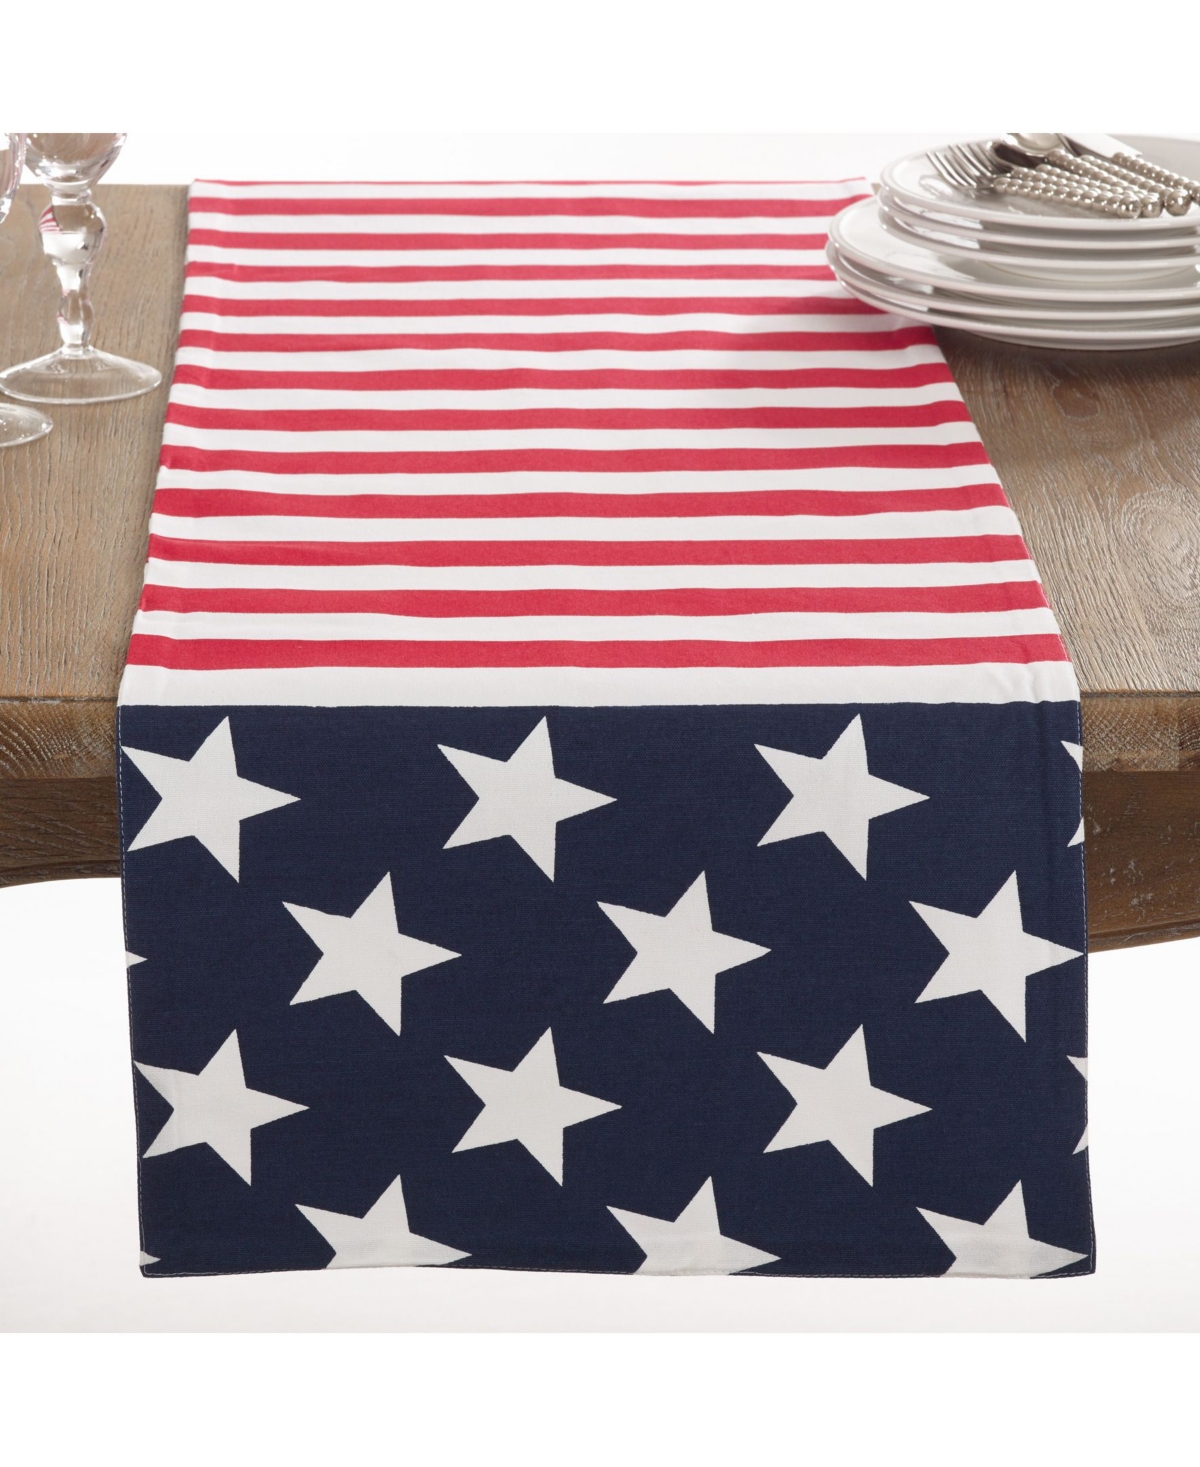 Saro Lifestyle Star Spangled American Flag Design Table Runner In Red